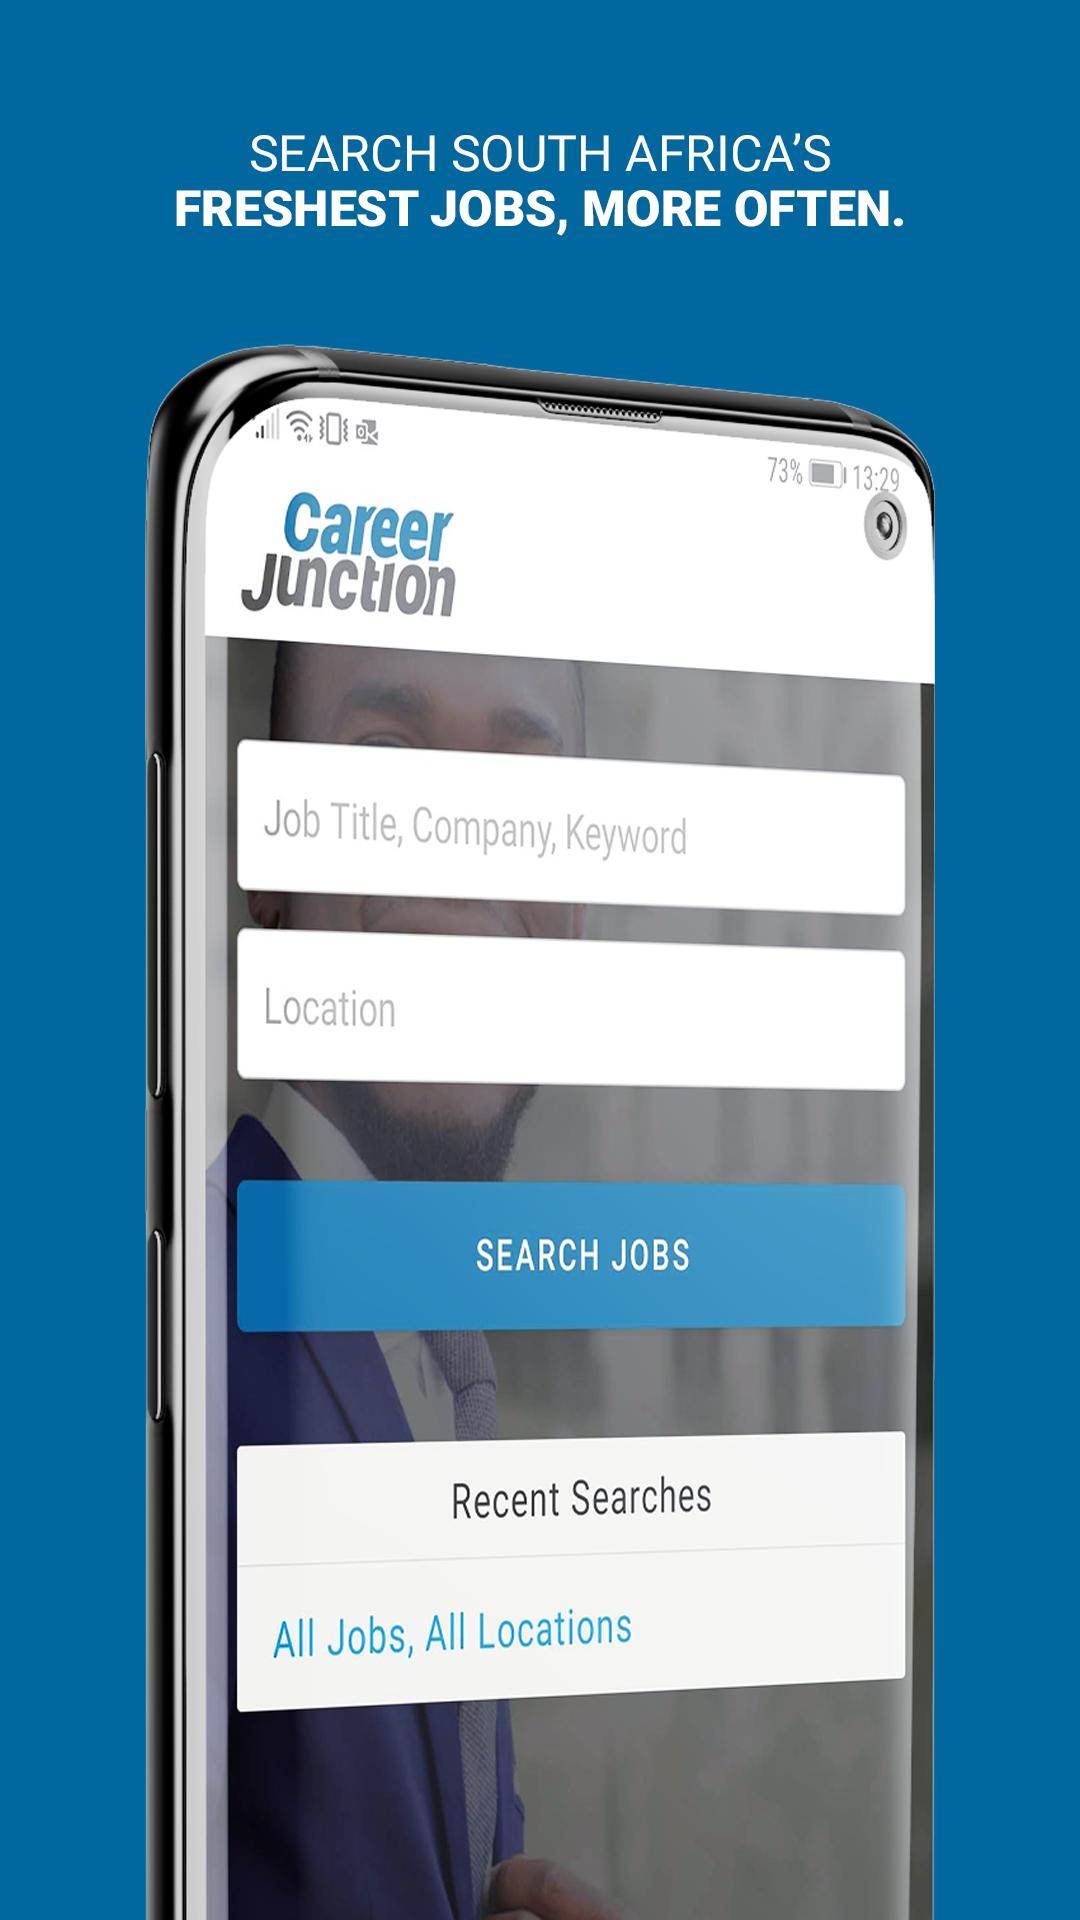 CareerJunction - Search for the latest jobs in SA